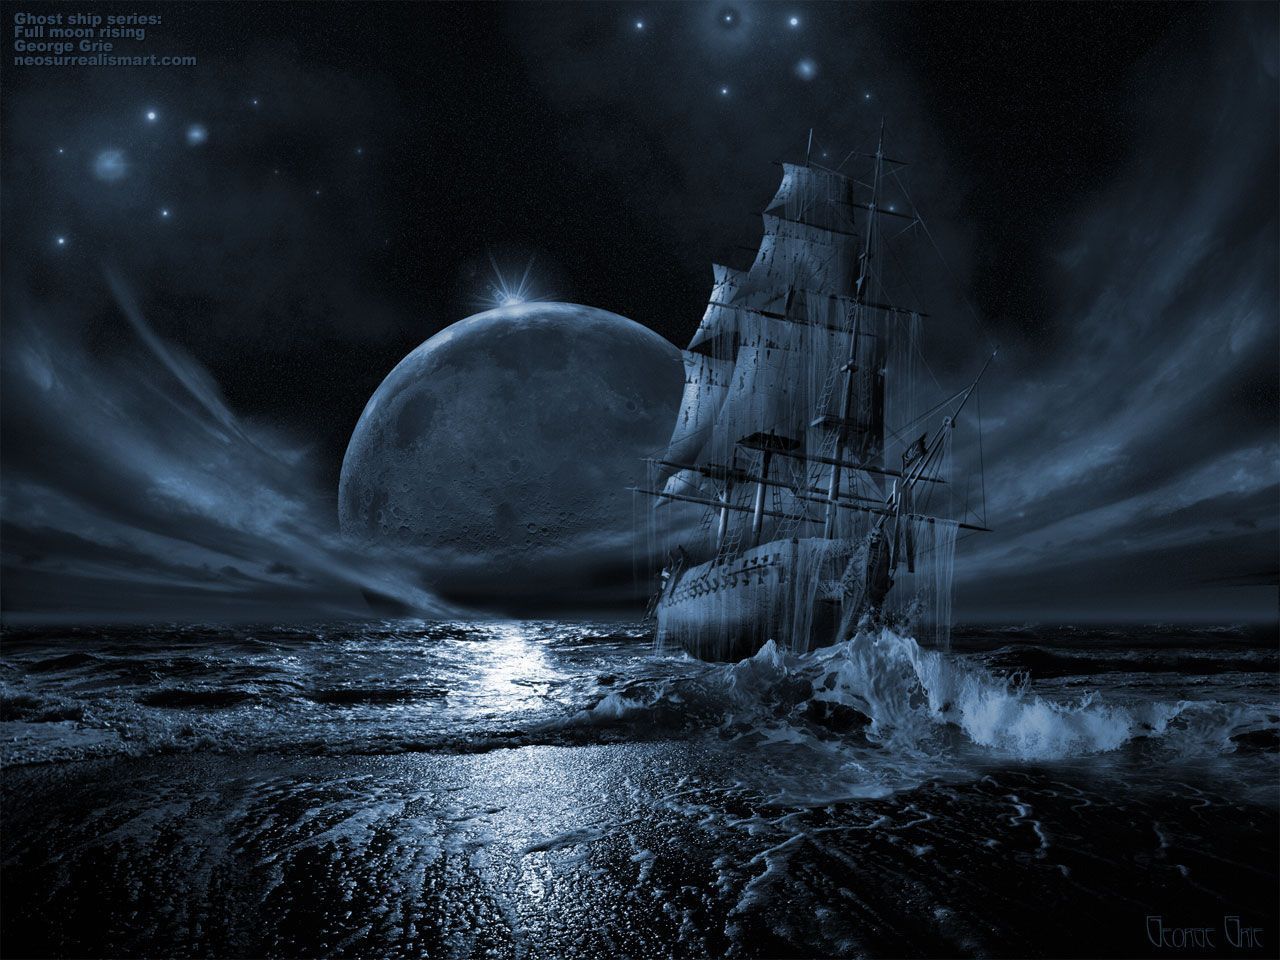 Ghost ship series: Full moon rising Wallpapers - HD Wallpapers 29368